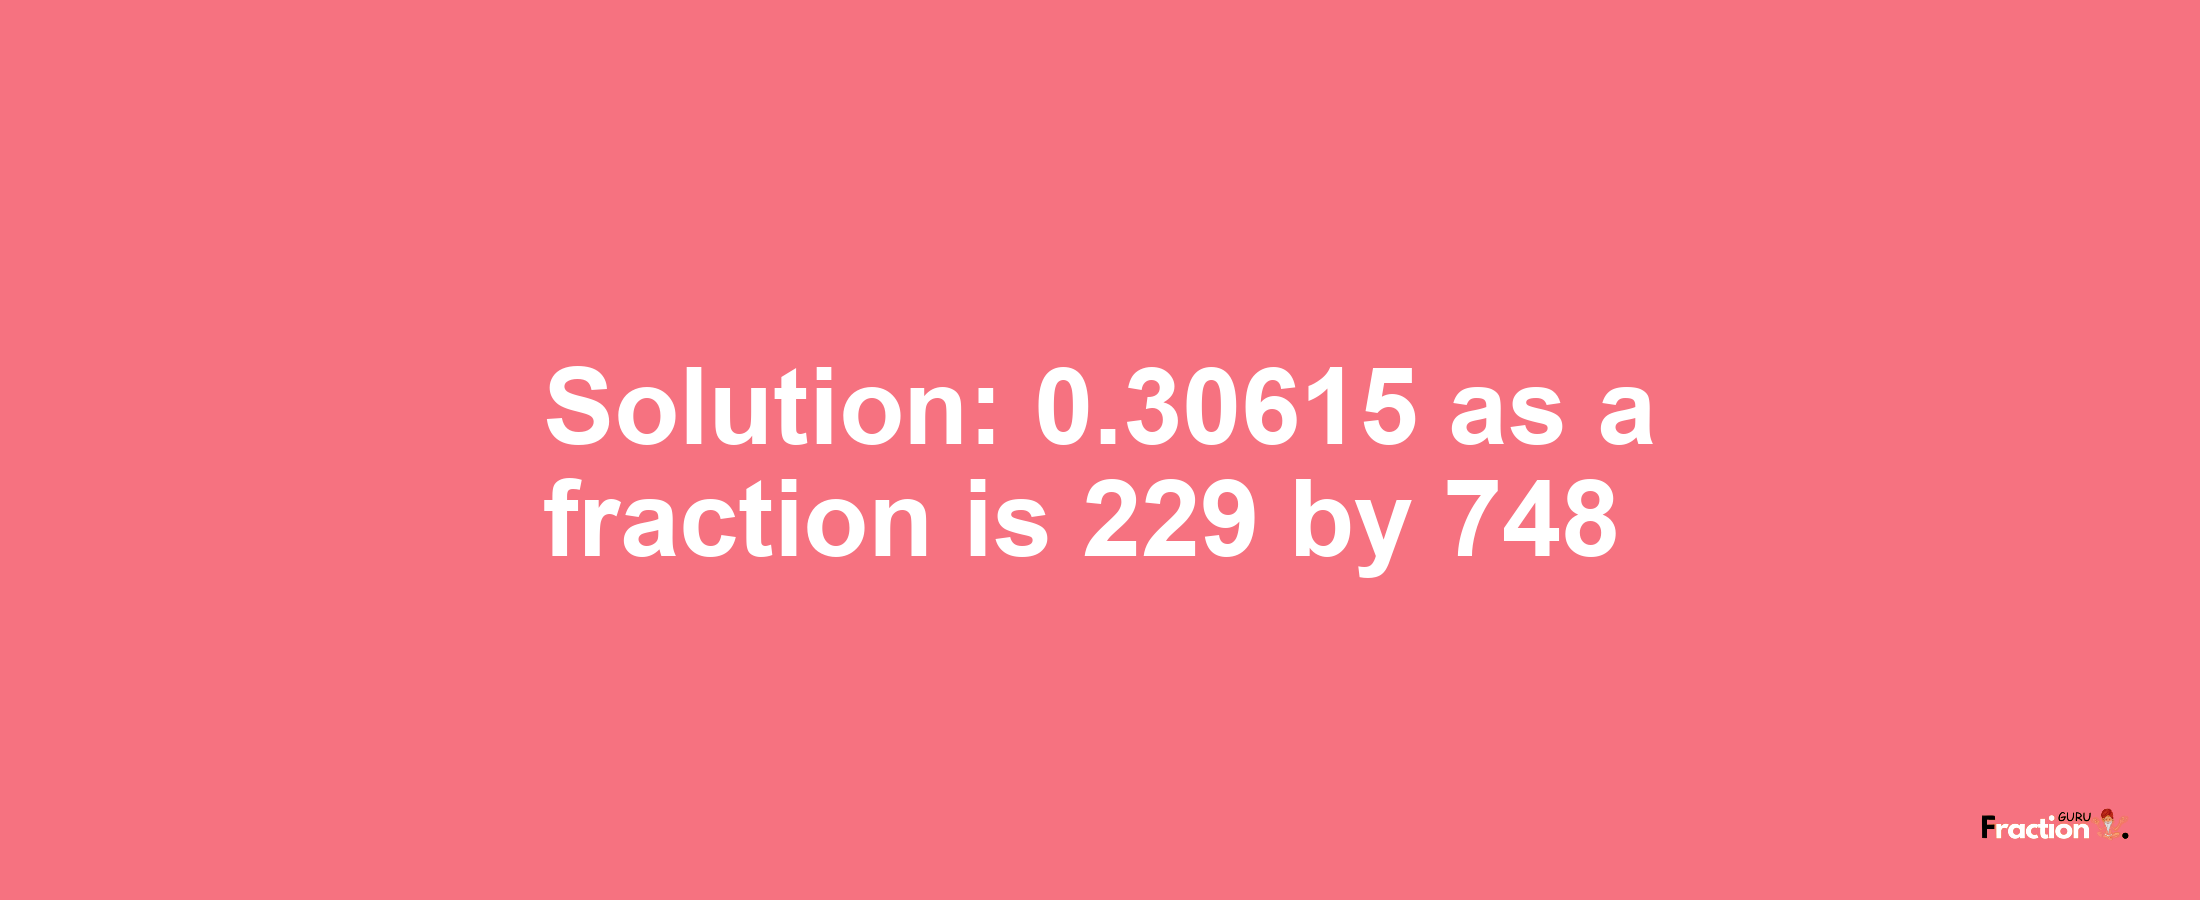 Solution:0.30615 as a fraction is 229/748